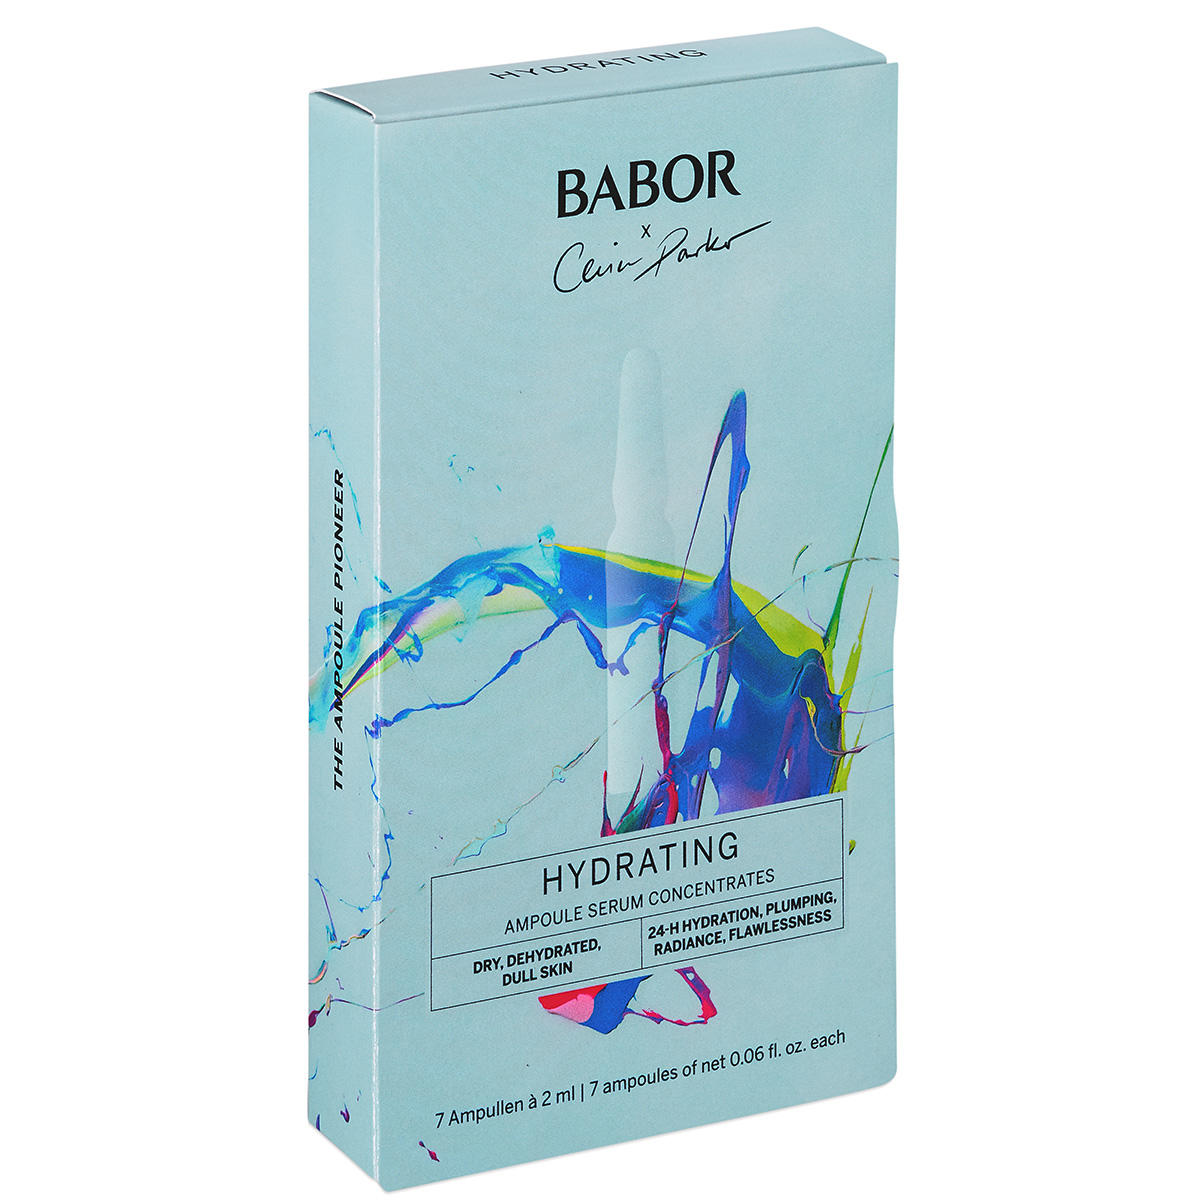 BABOR AMPOULE CONCENTRATES Hydraterende Ampul Beperkte Editie 7 x 2 ml - 2